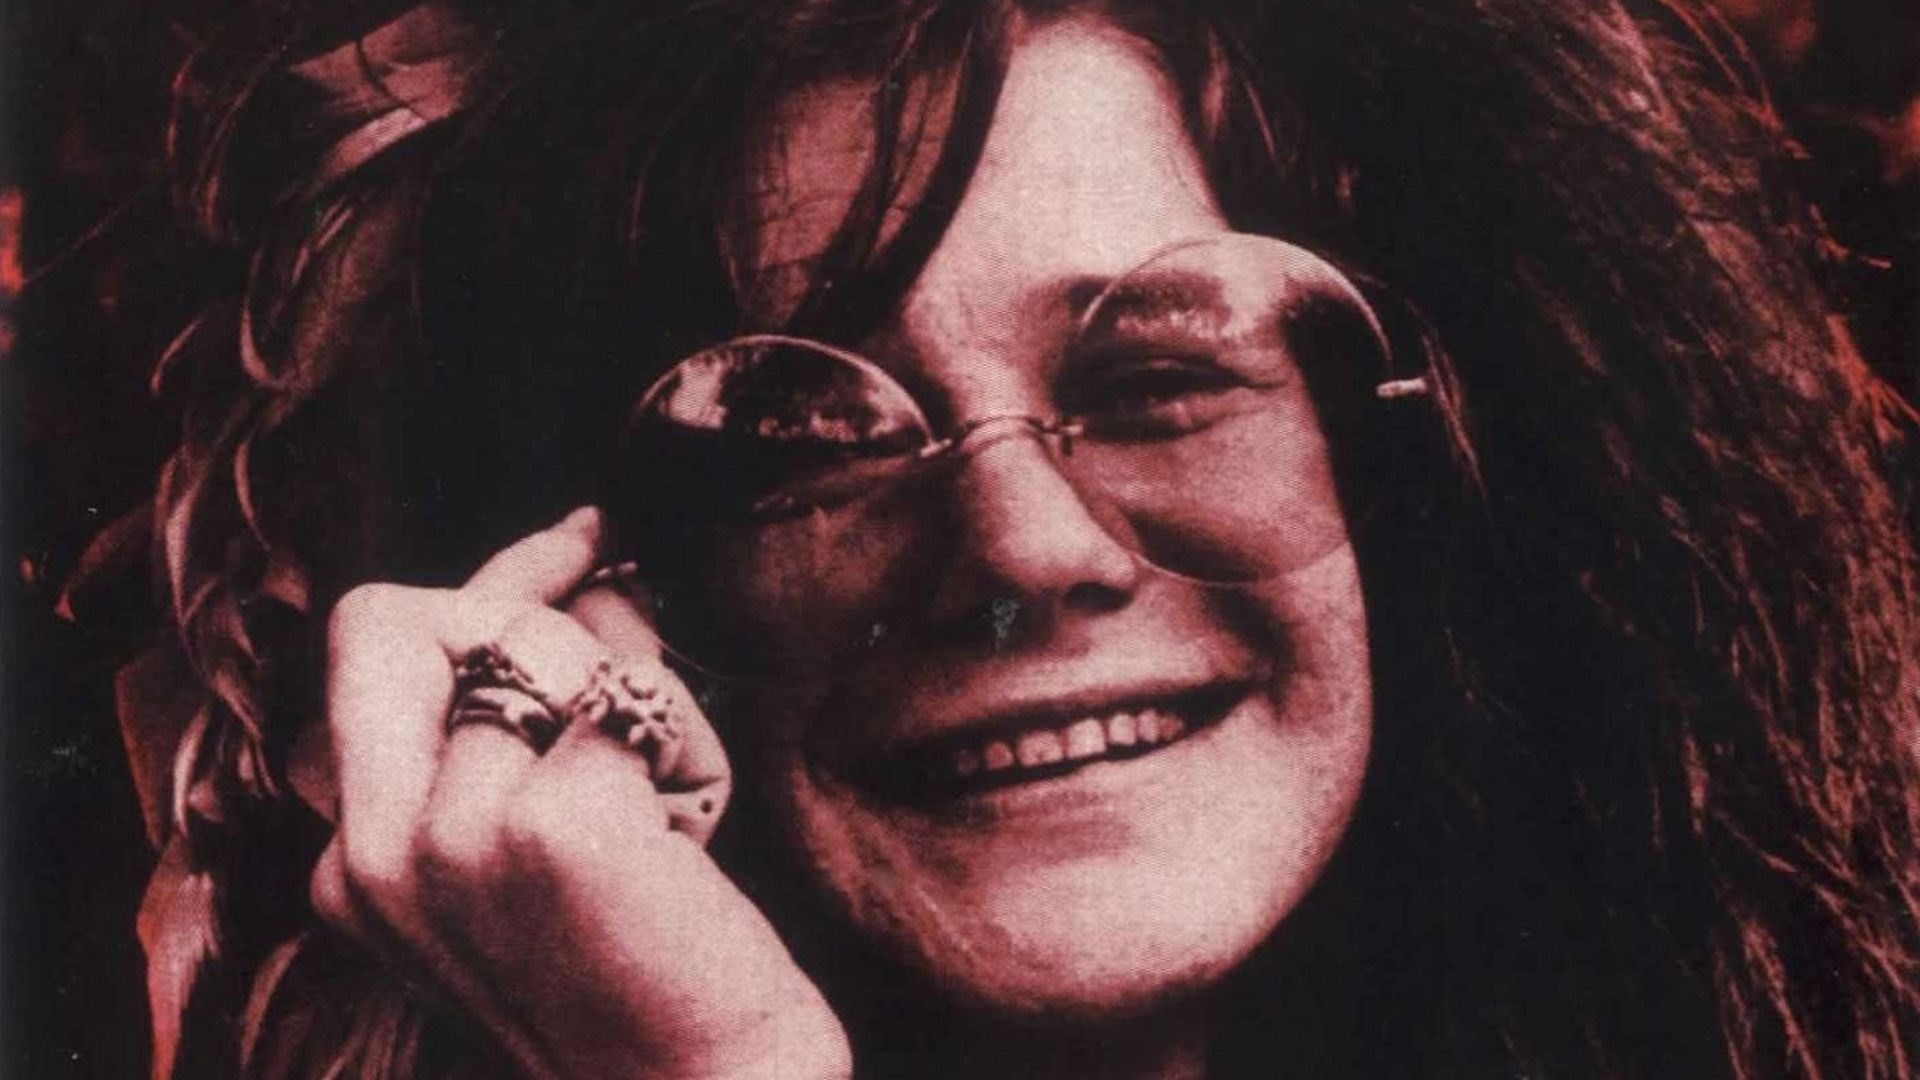 1920x1080 free download pictures of janis joplin 1920x1080.